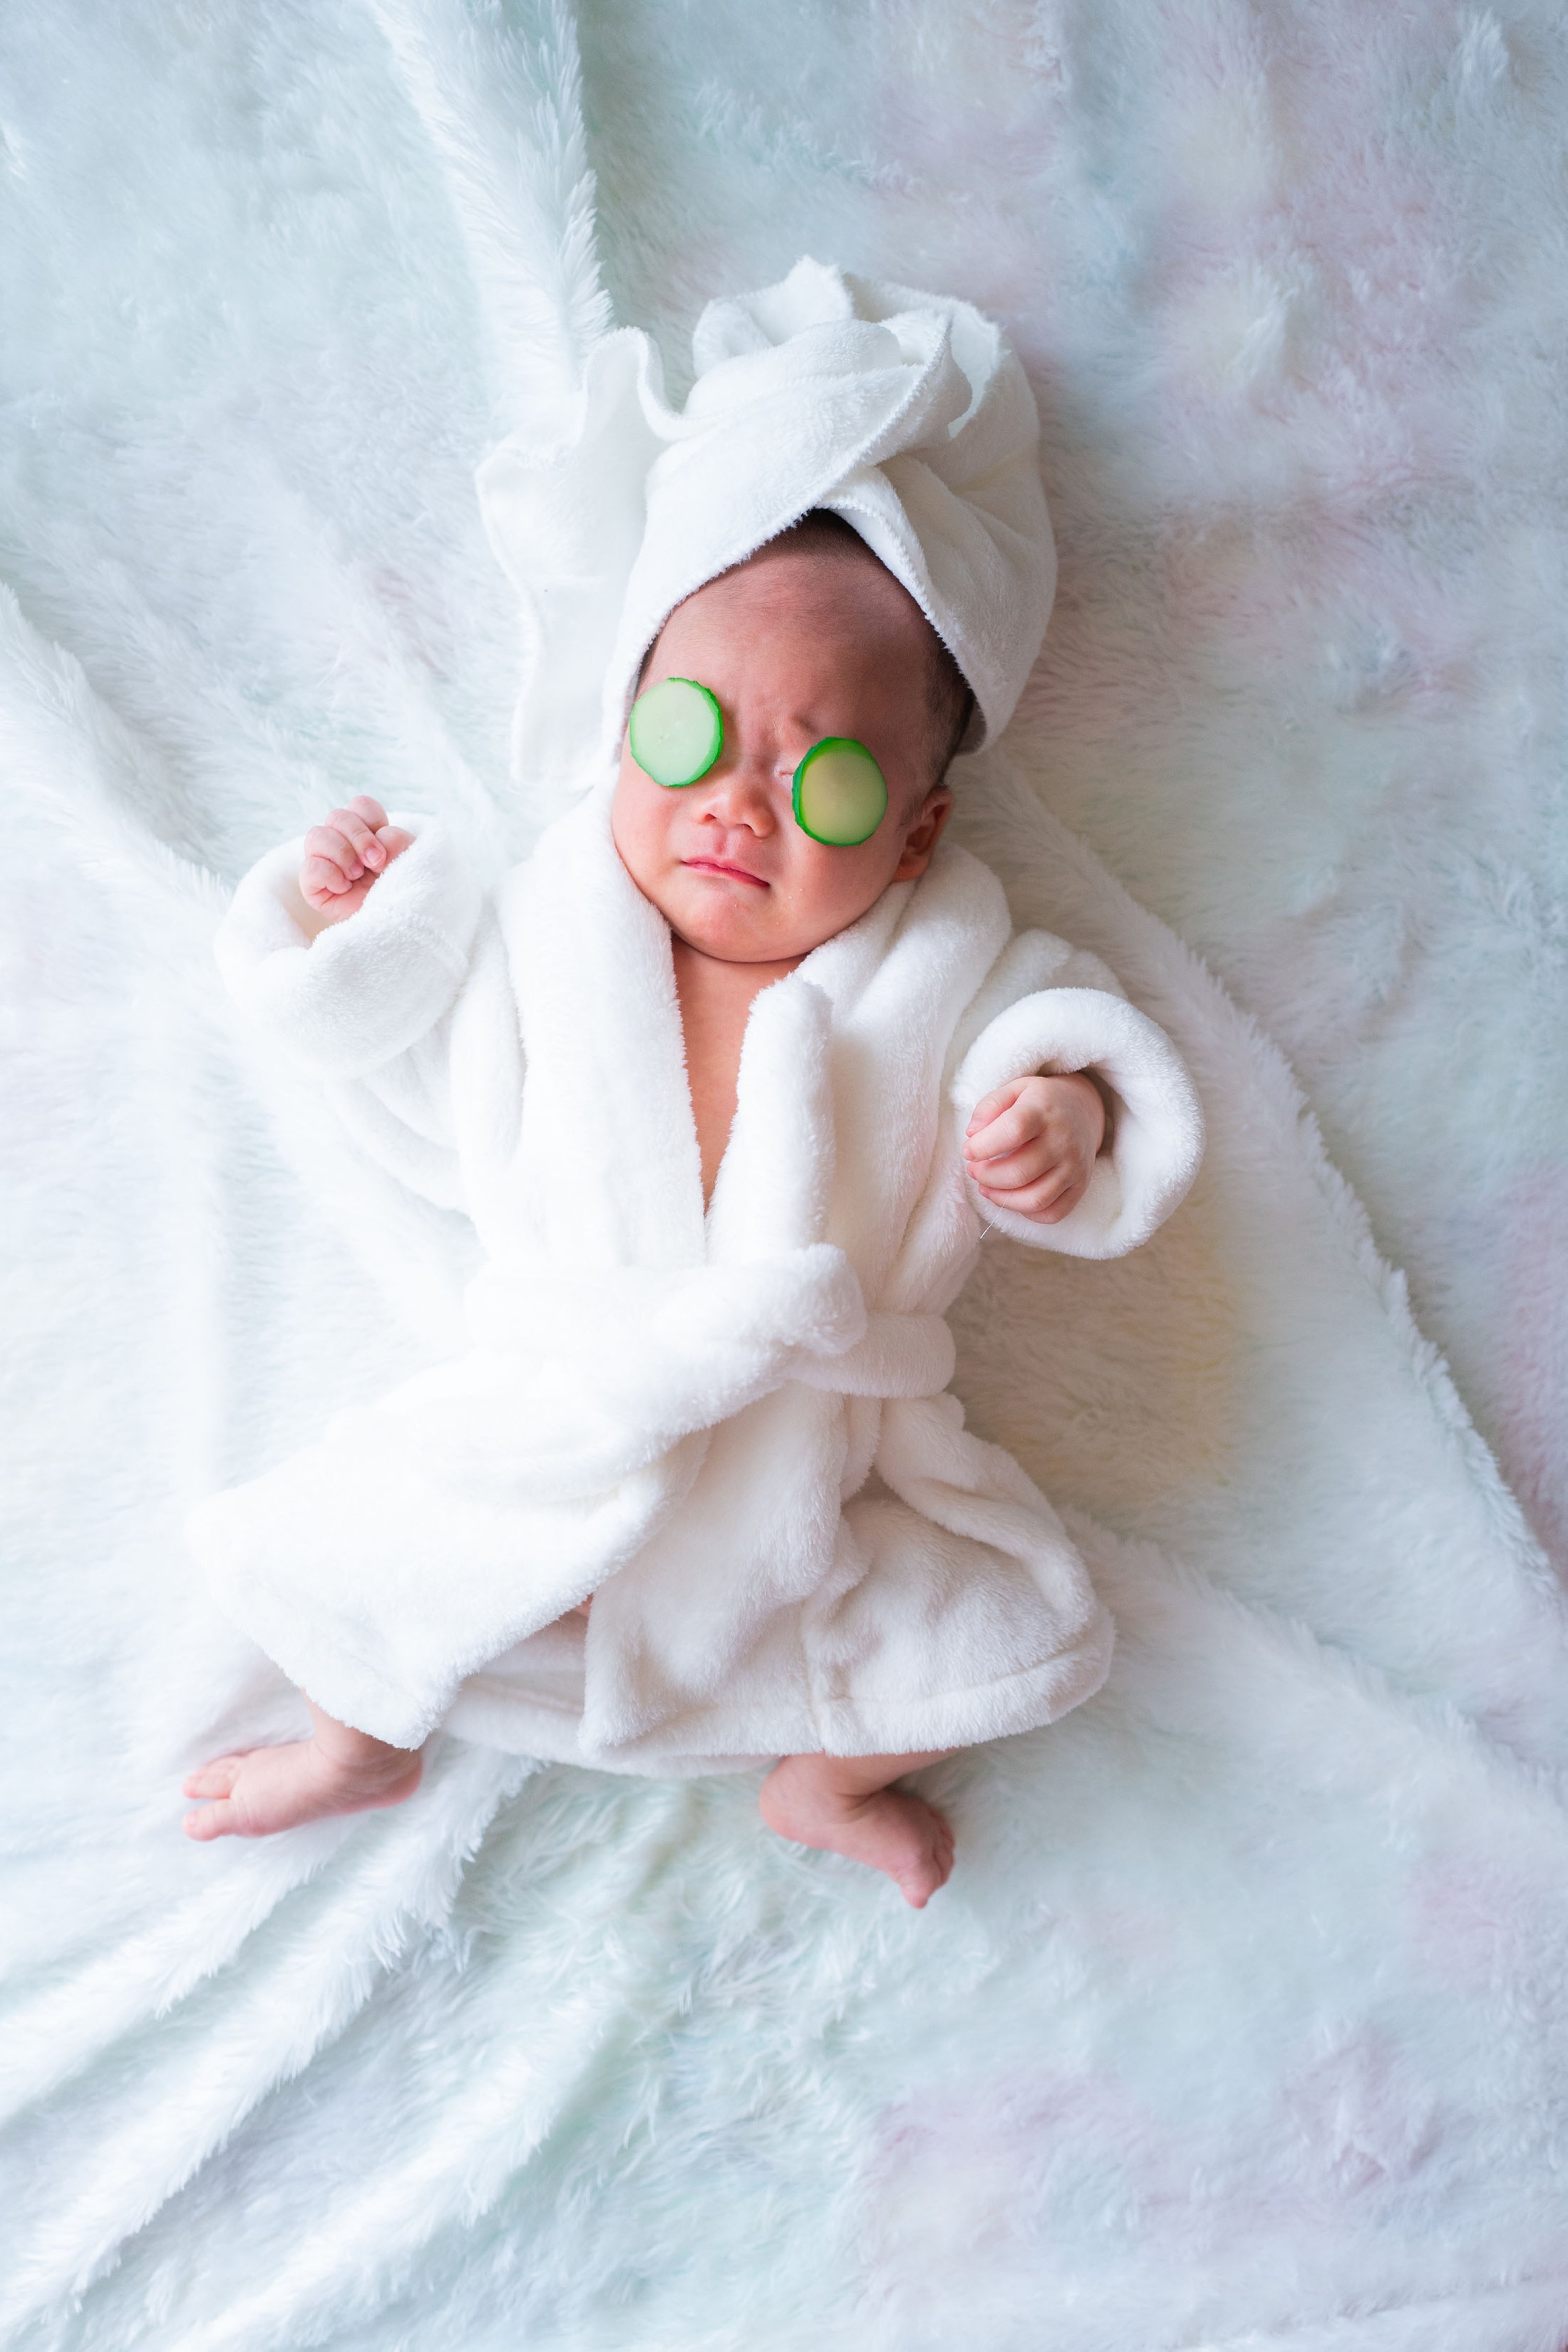 Even babies need skin care.  (Photo Shutterstock)